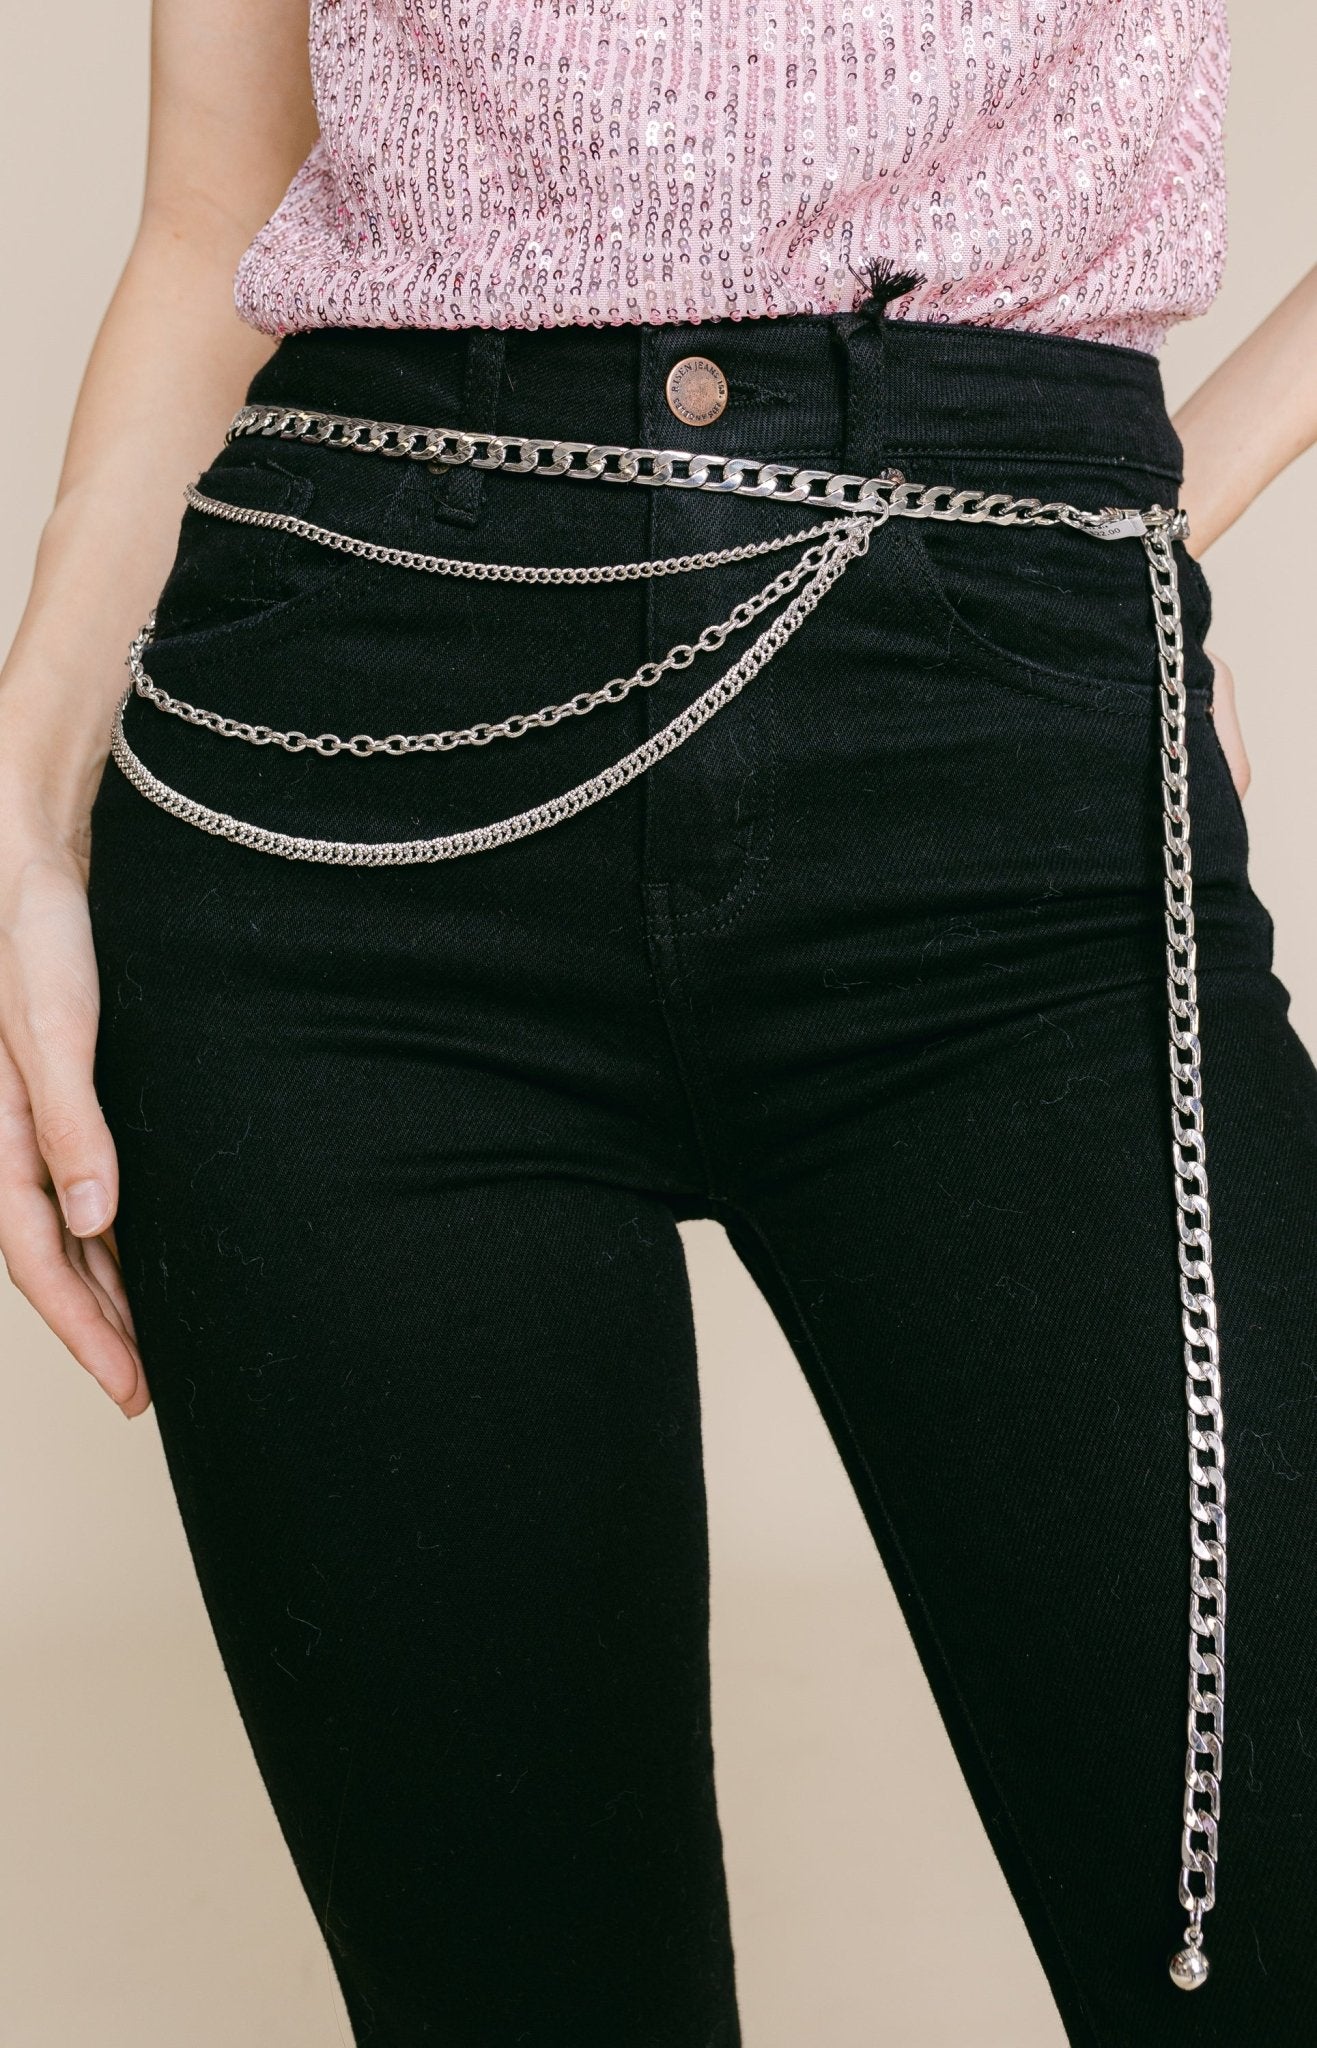 Chic Links Layered Chain Belt -Multiple Colors Belts - 60